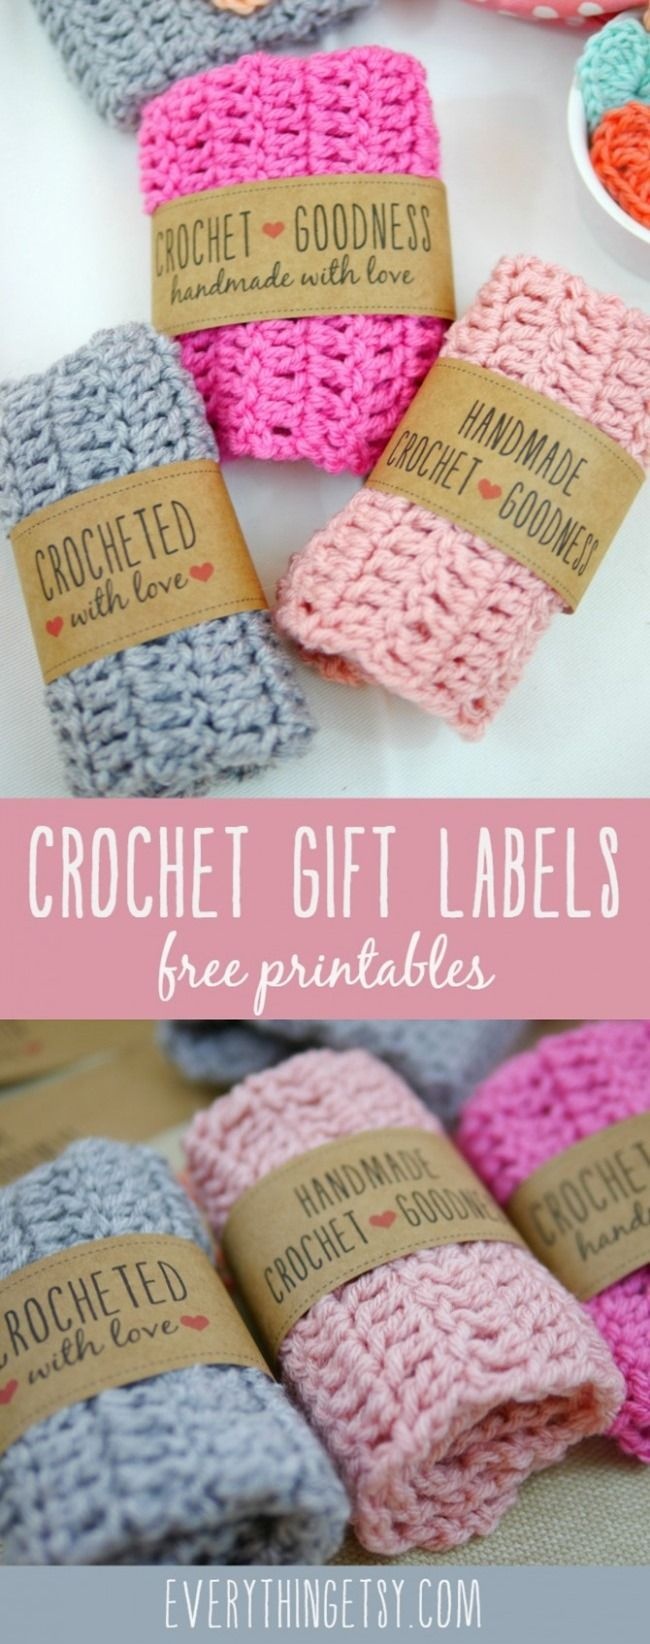 10 Free Crochet Patterns For A Coffee Cozy…or Two | Crochet - Free Printable Crochet Patterns